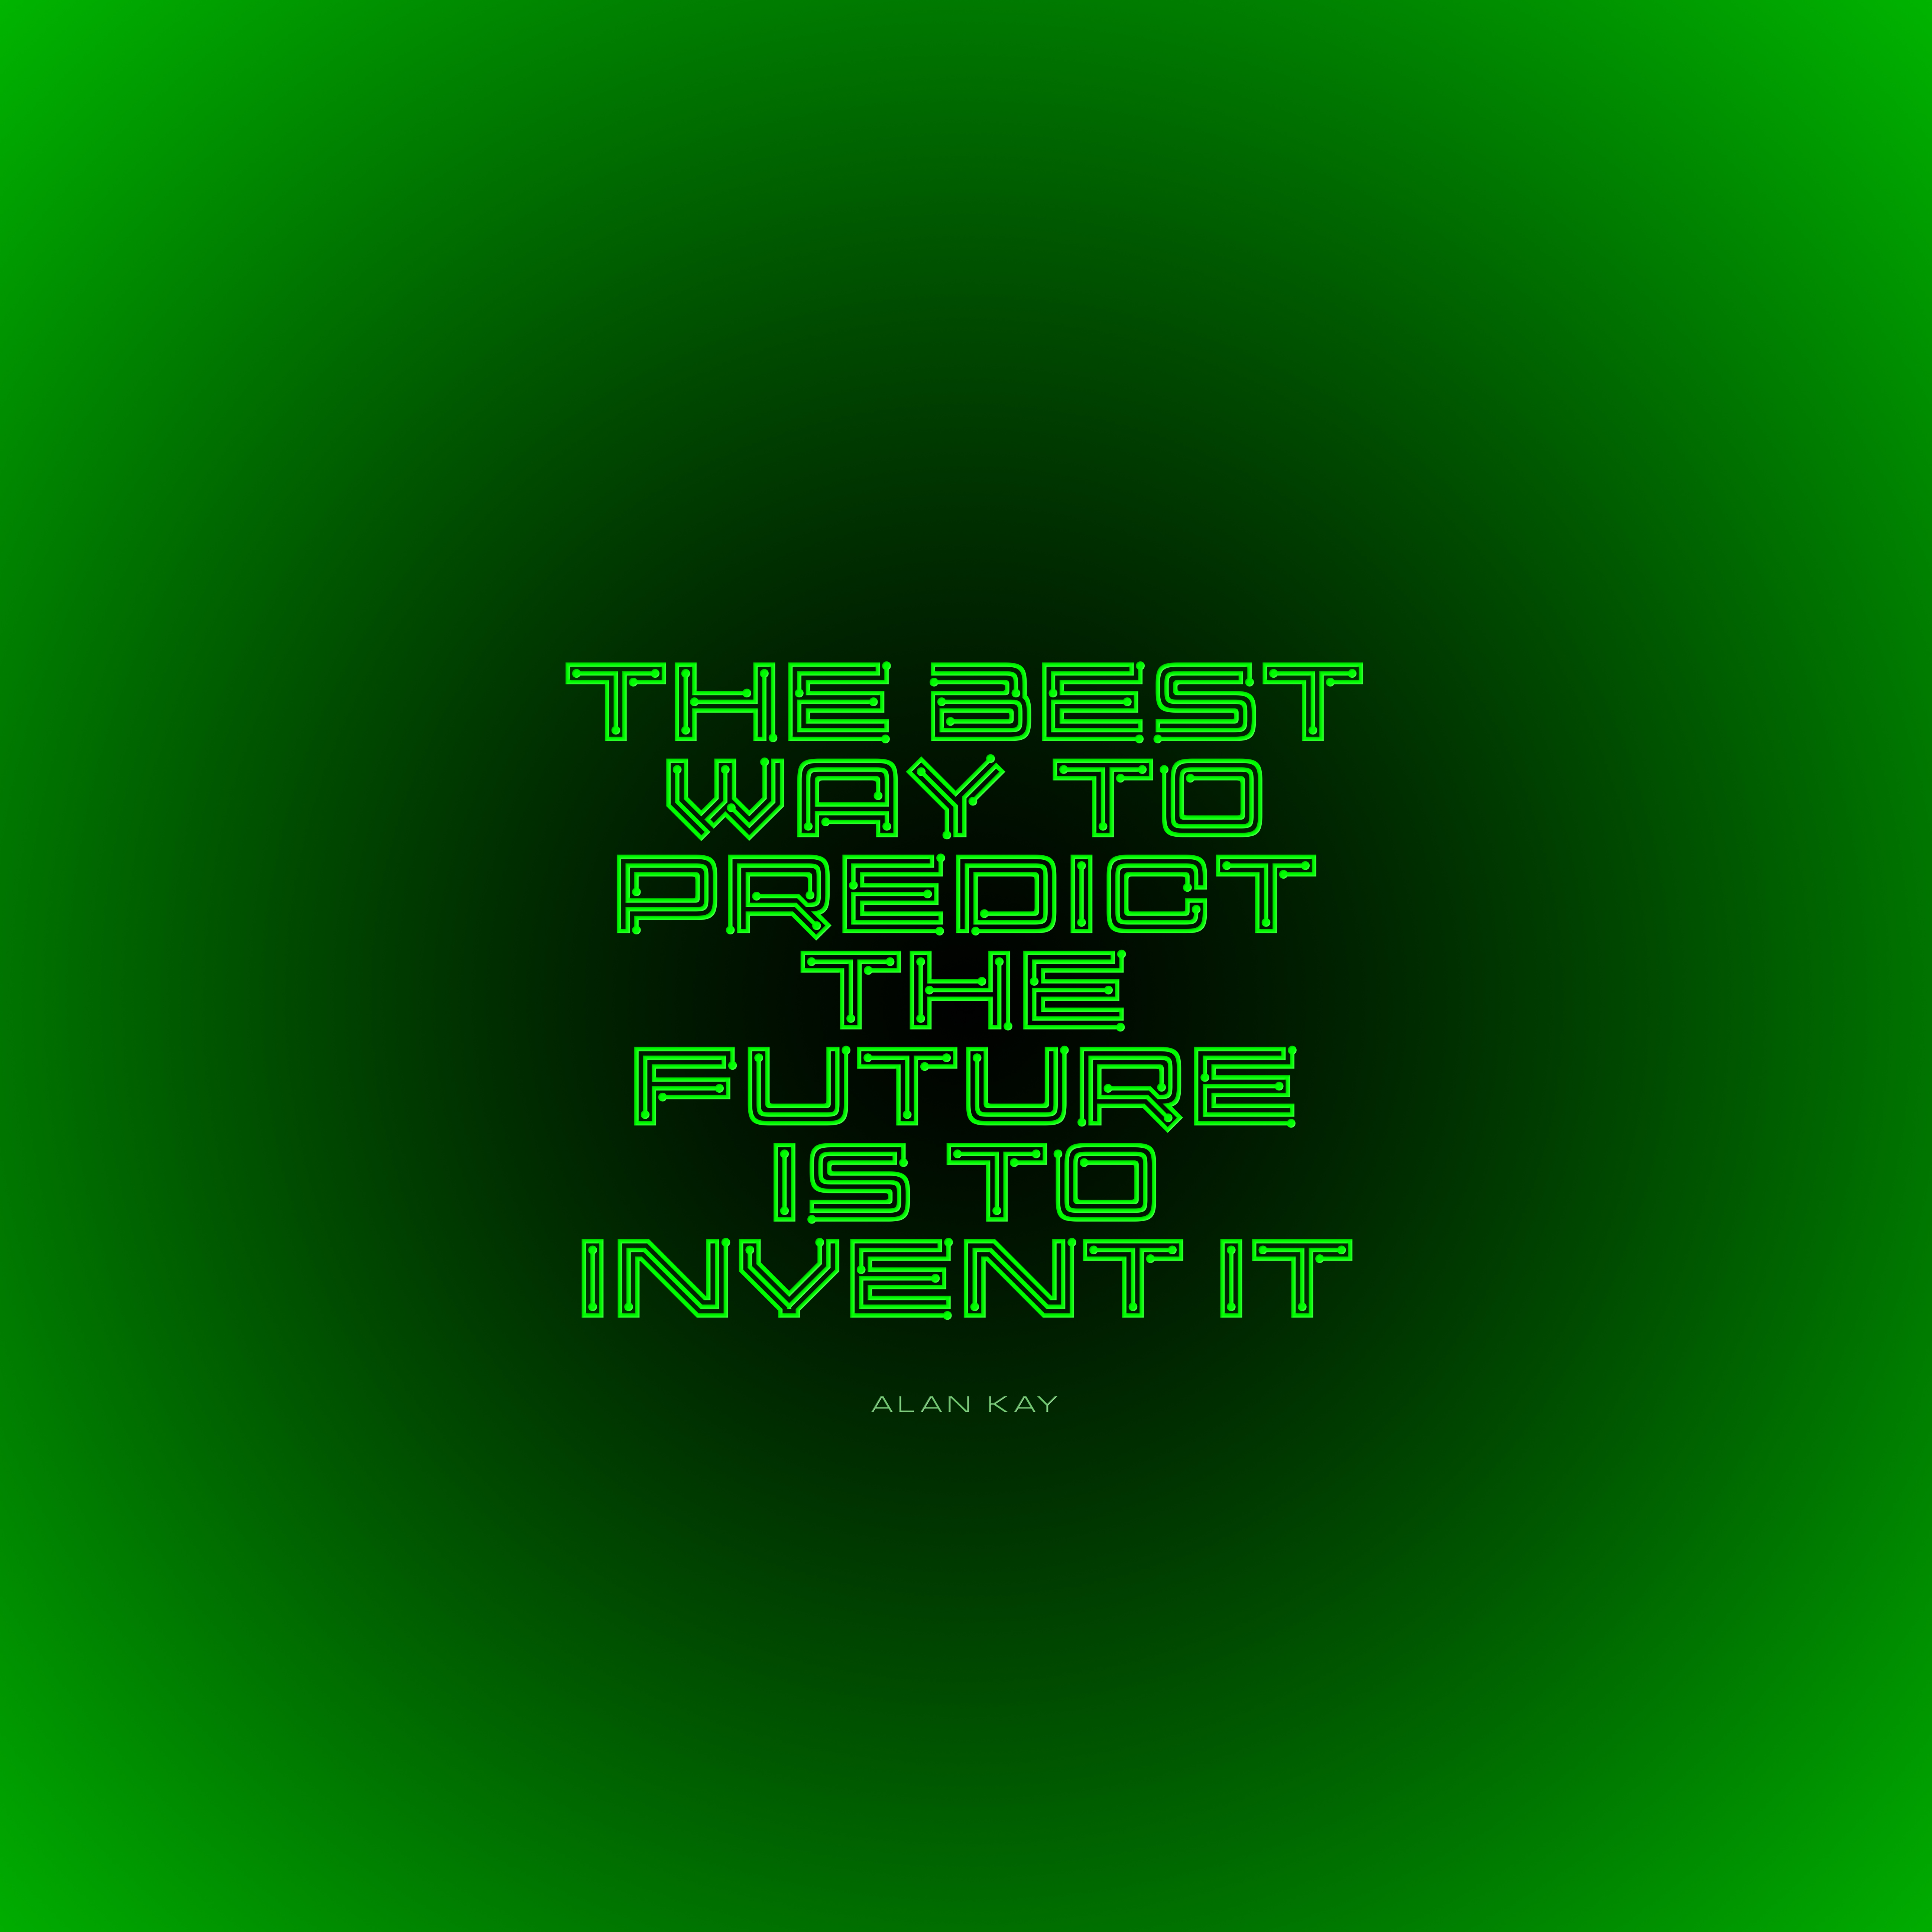 Free Images words, motivation, inspiration, green Future